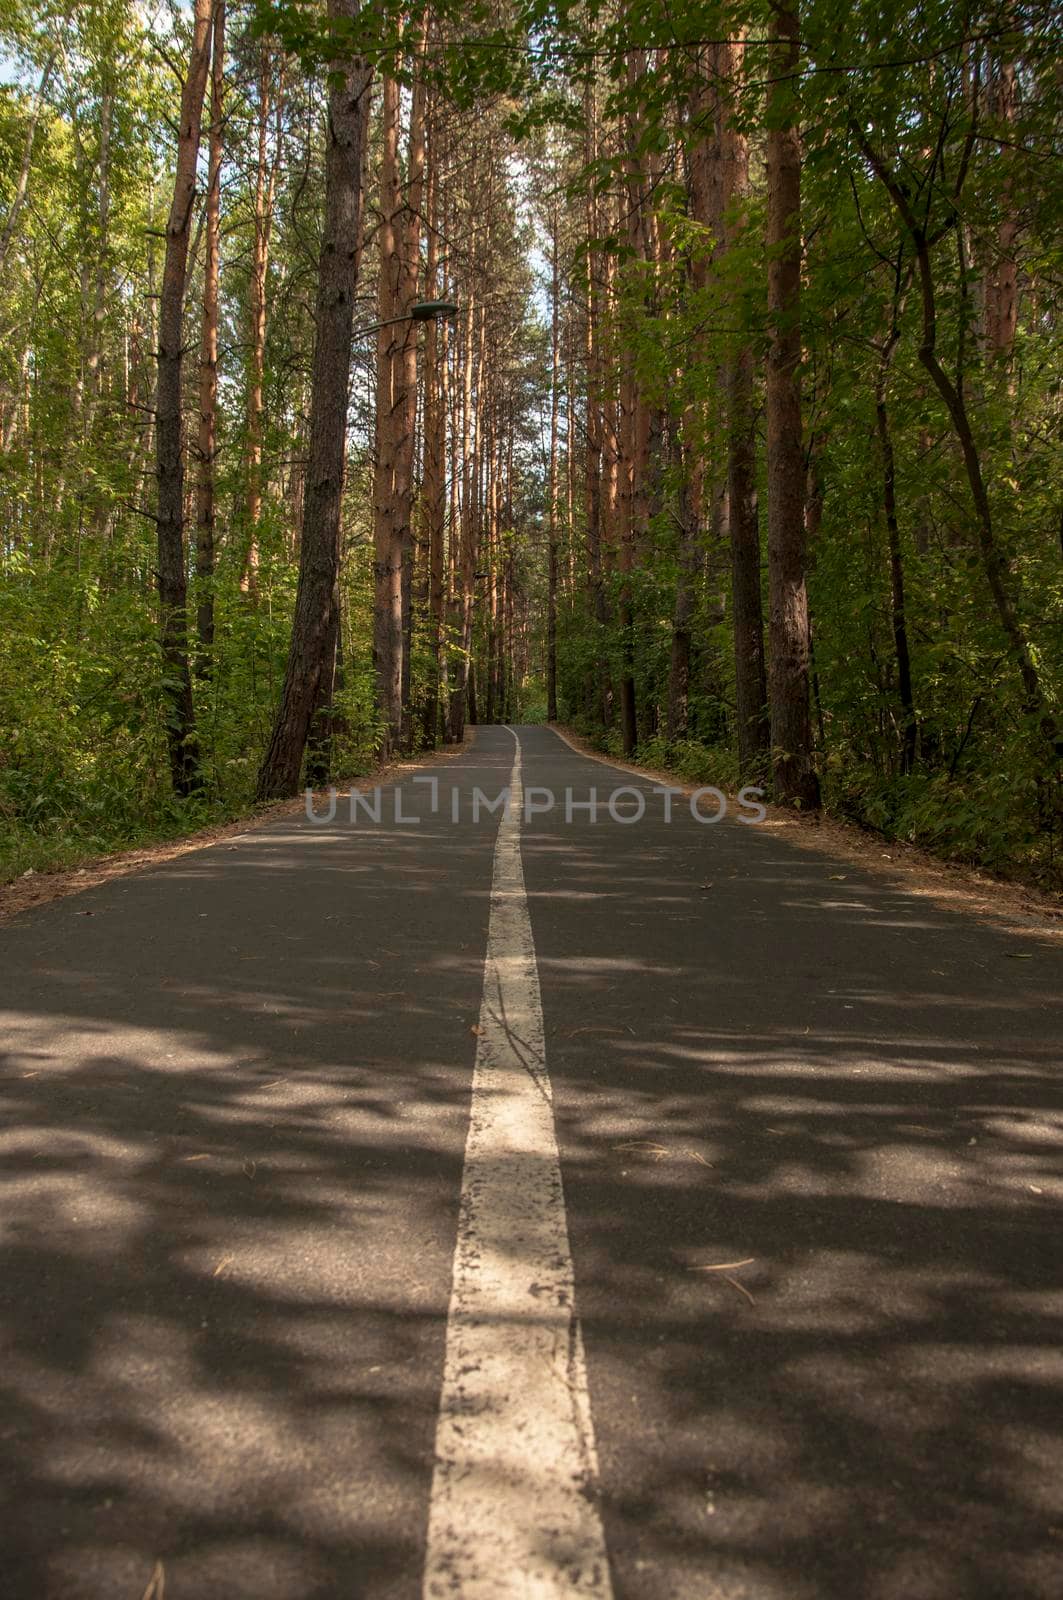 An asphalt road with markings runs through the forest in summer day